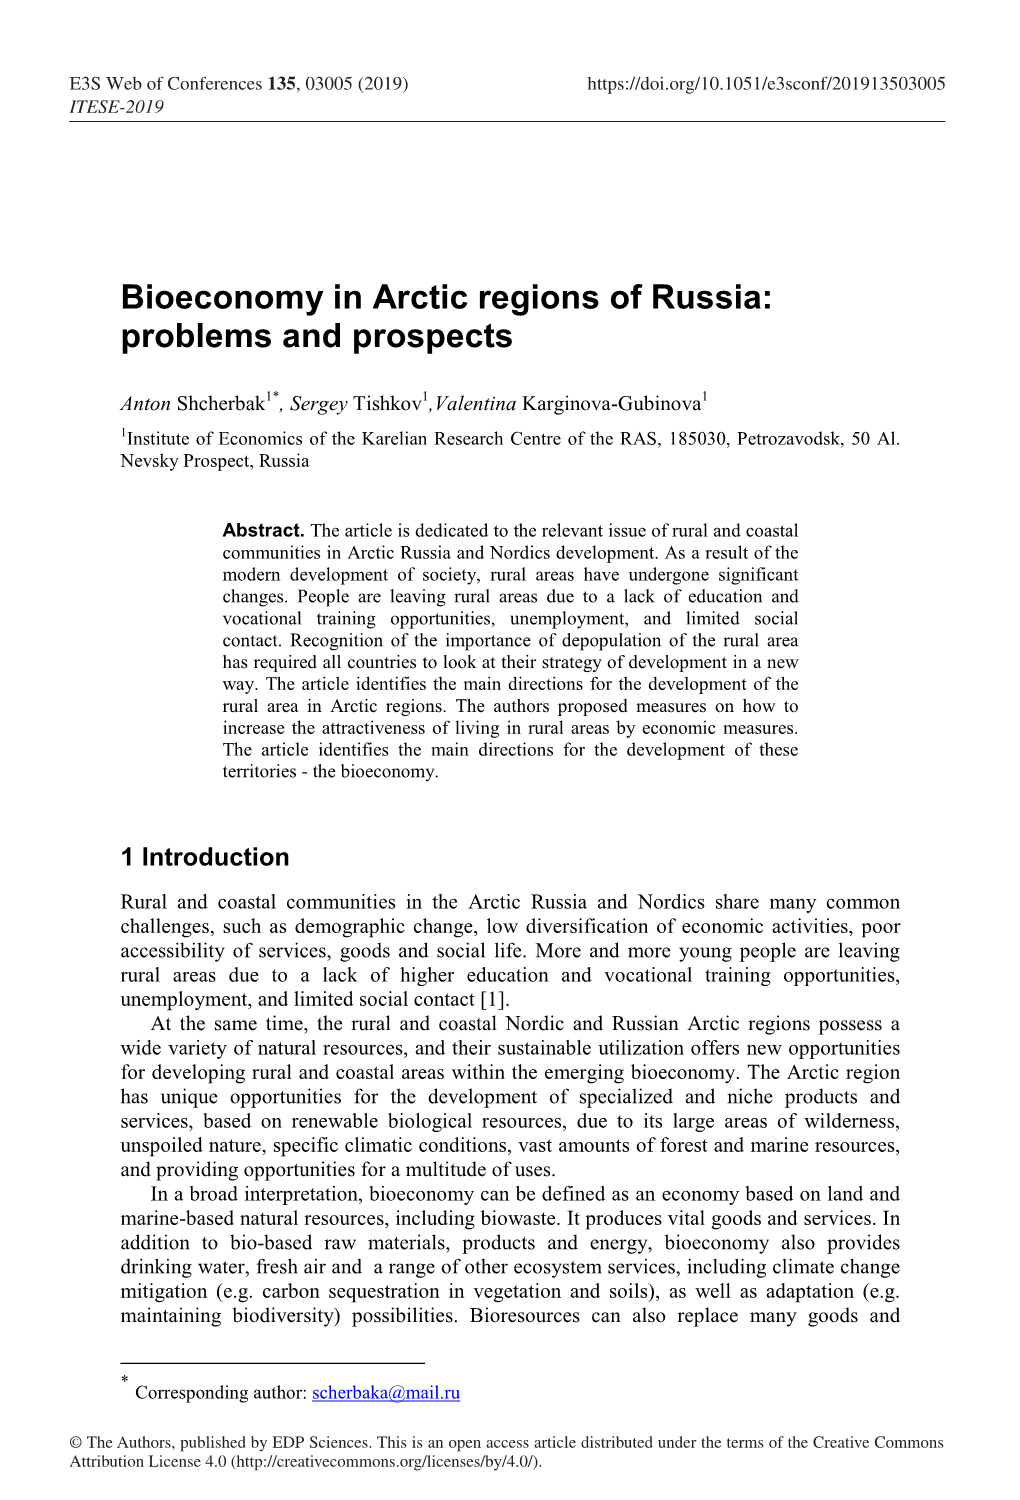 Bioeconomy in Arctic Regions of Russia: Problems and Prospects